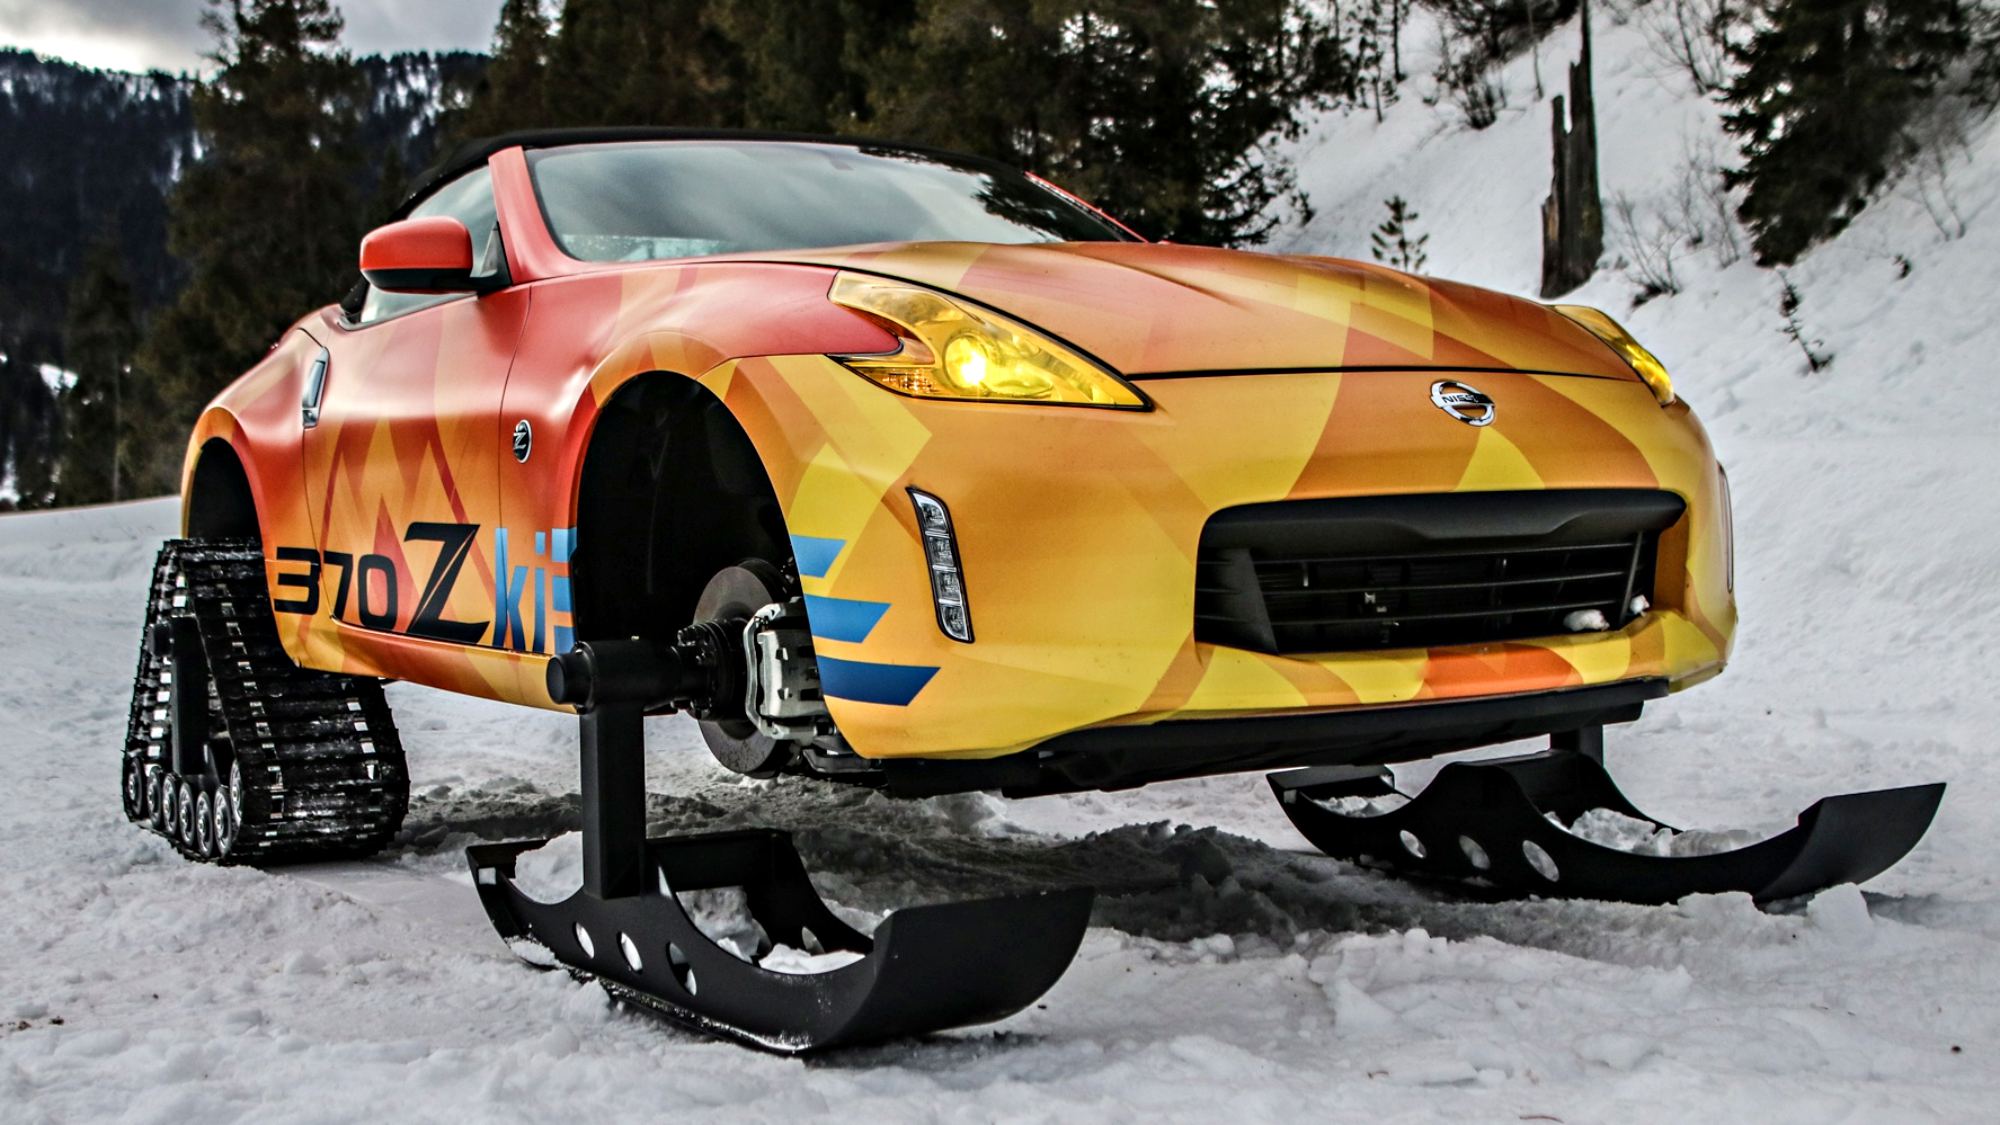 News - Nissan Shows Off 370'ZKI' Roadster/Snowmobile Pre-Chicago